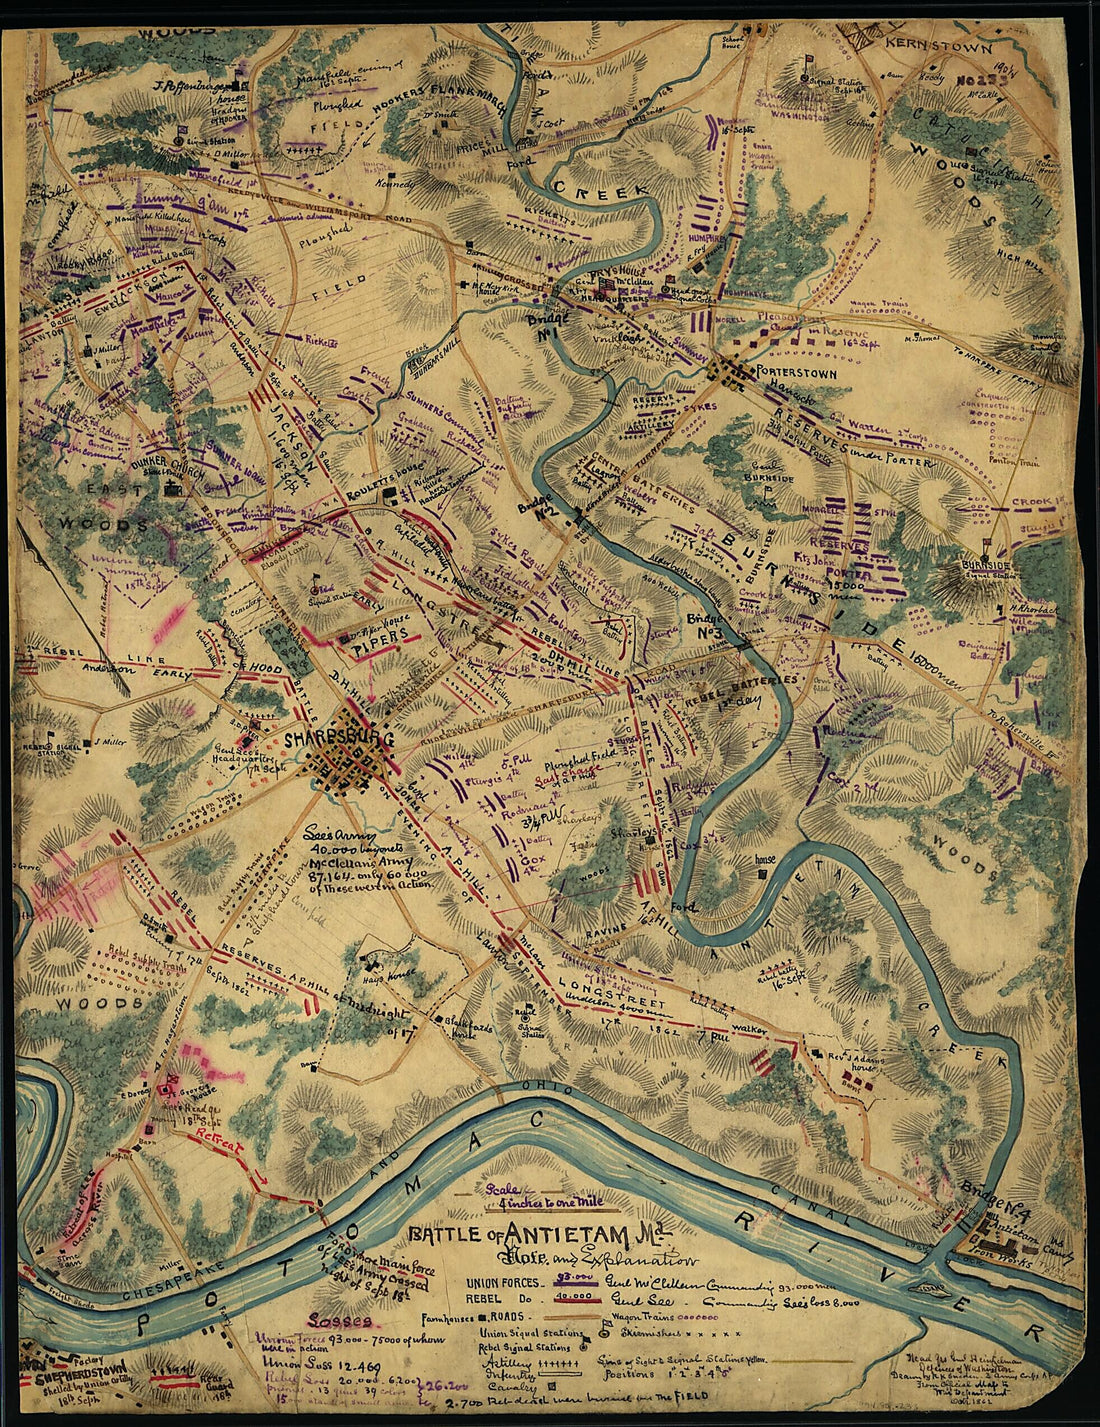 This old map of Battle of Antietam, Md from 1862 was created by Robert Knox Sneden in 1862